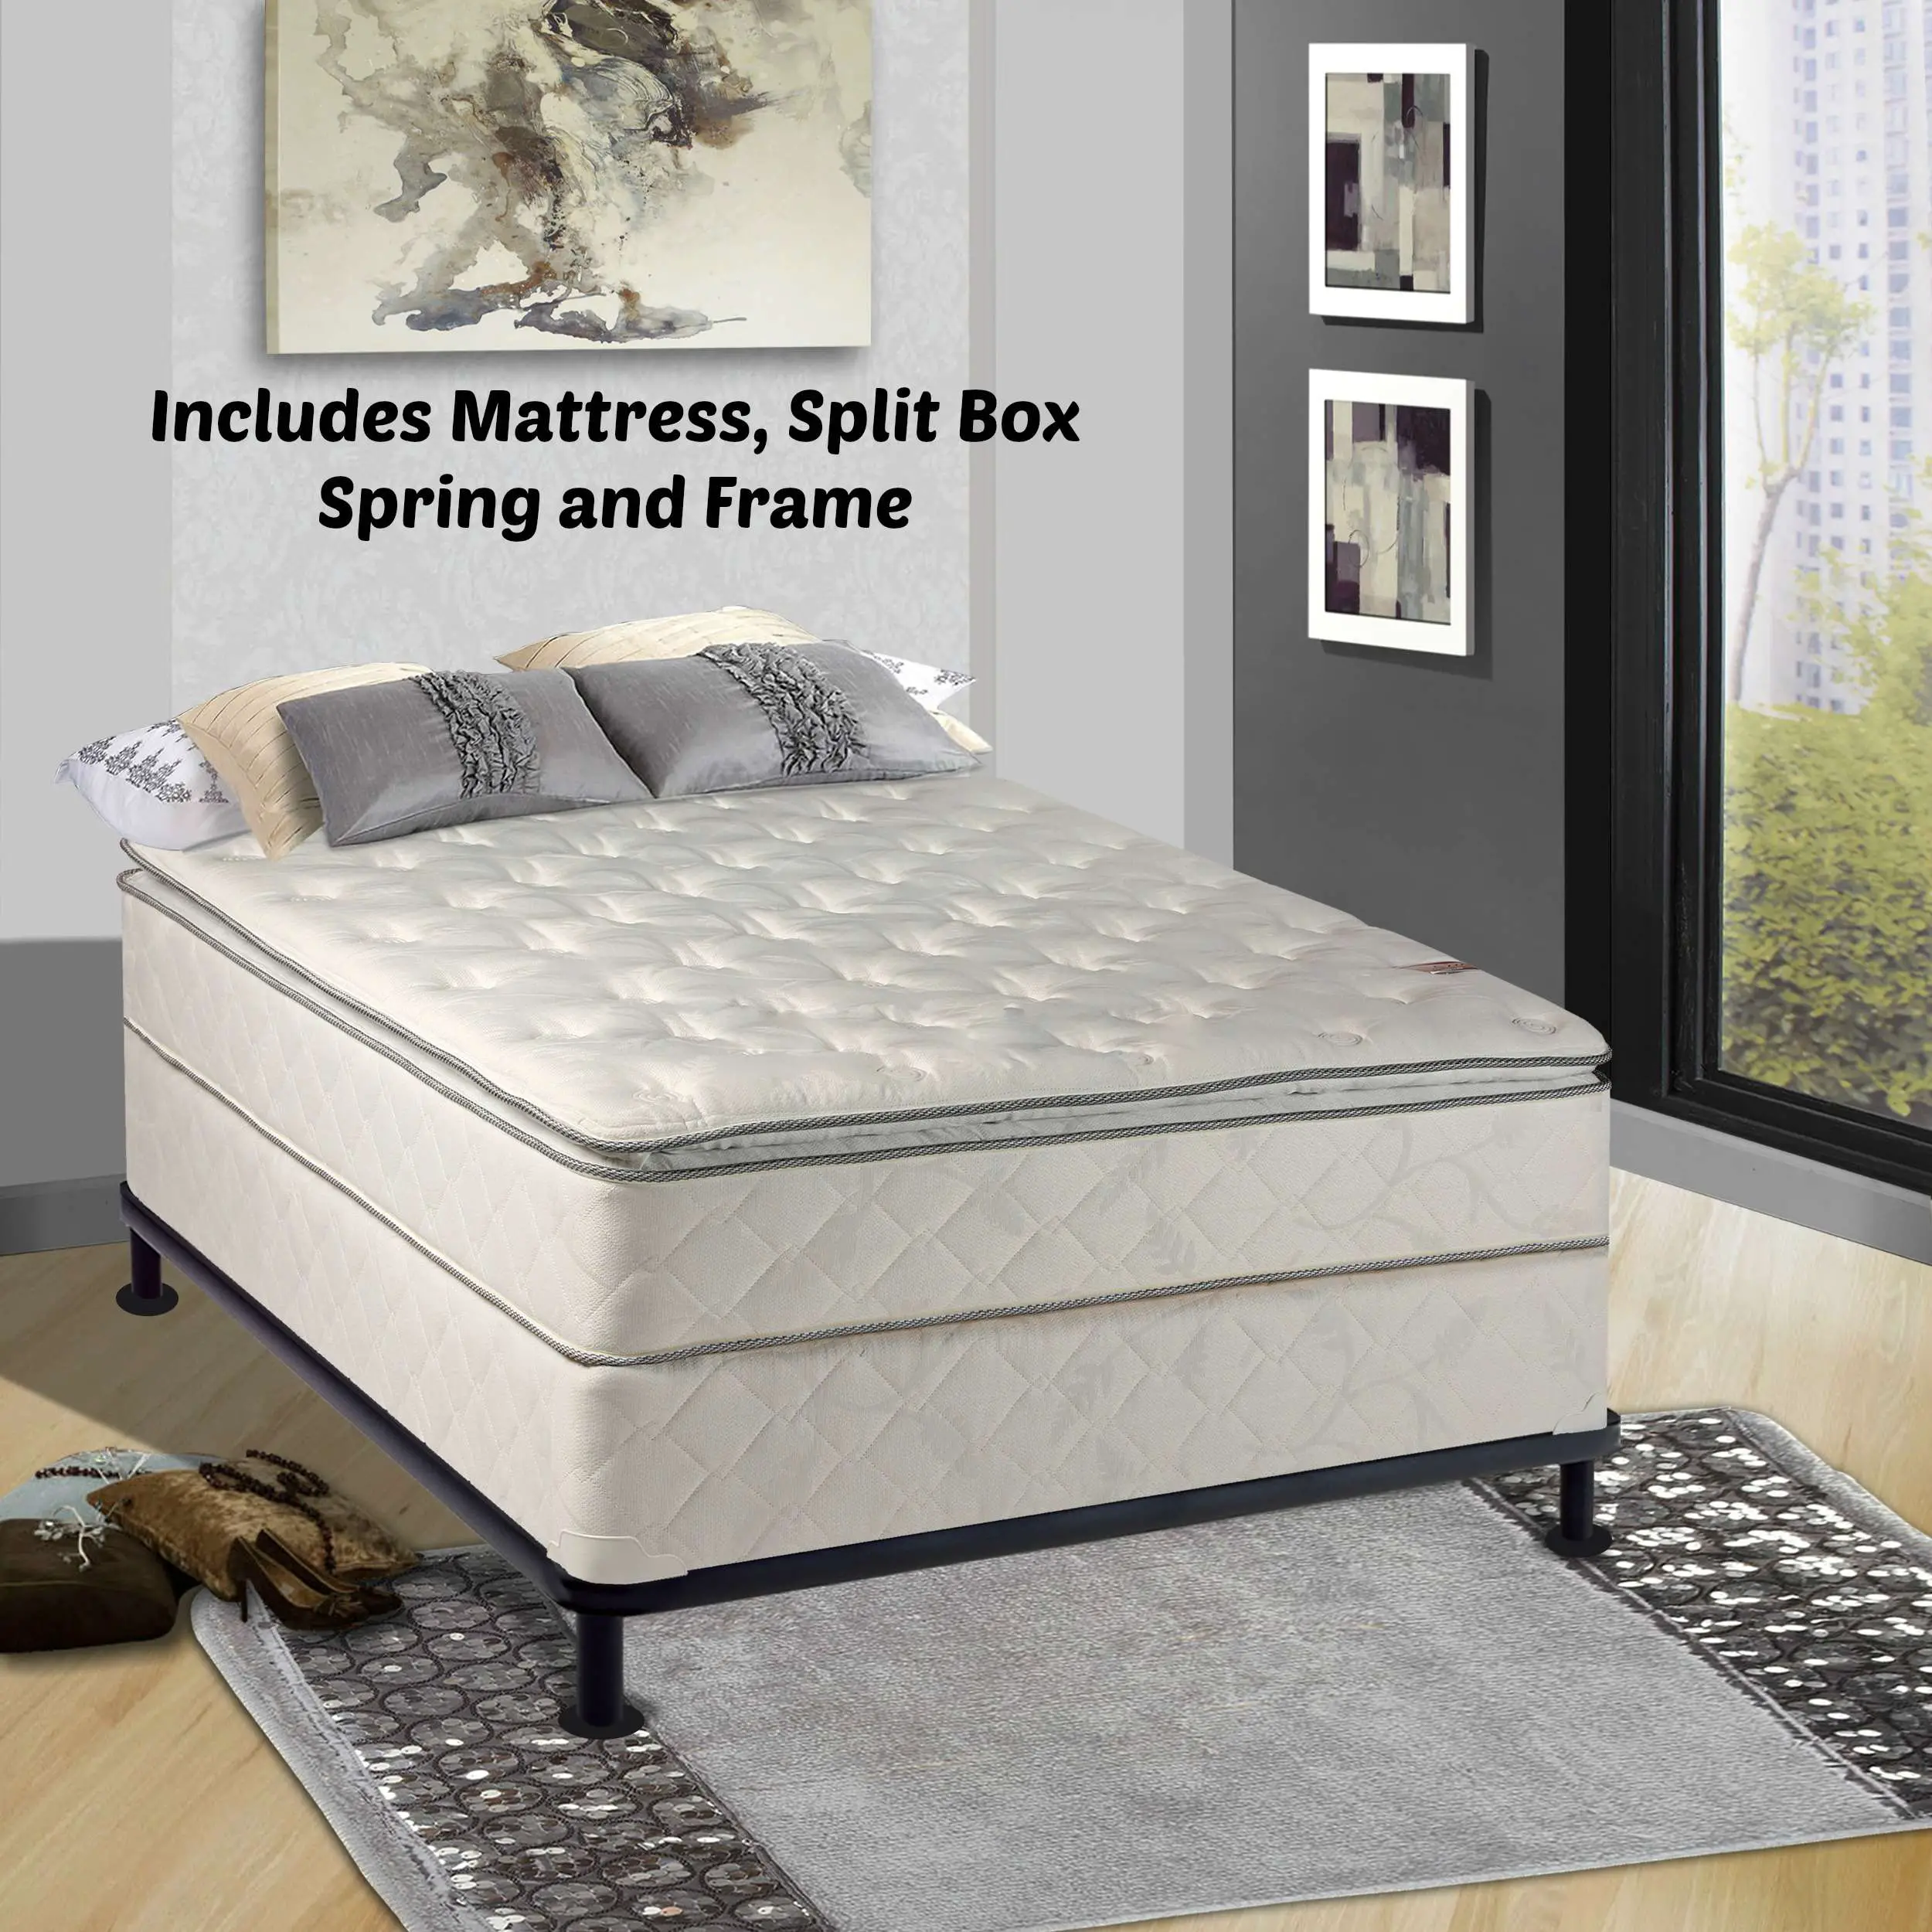 Can You Put A Sleep Number On A Box Spring